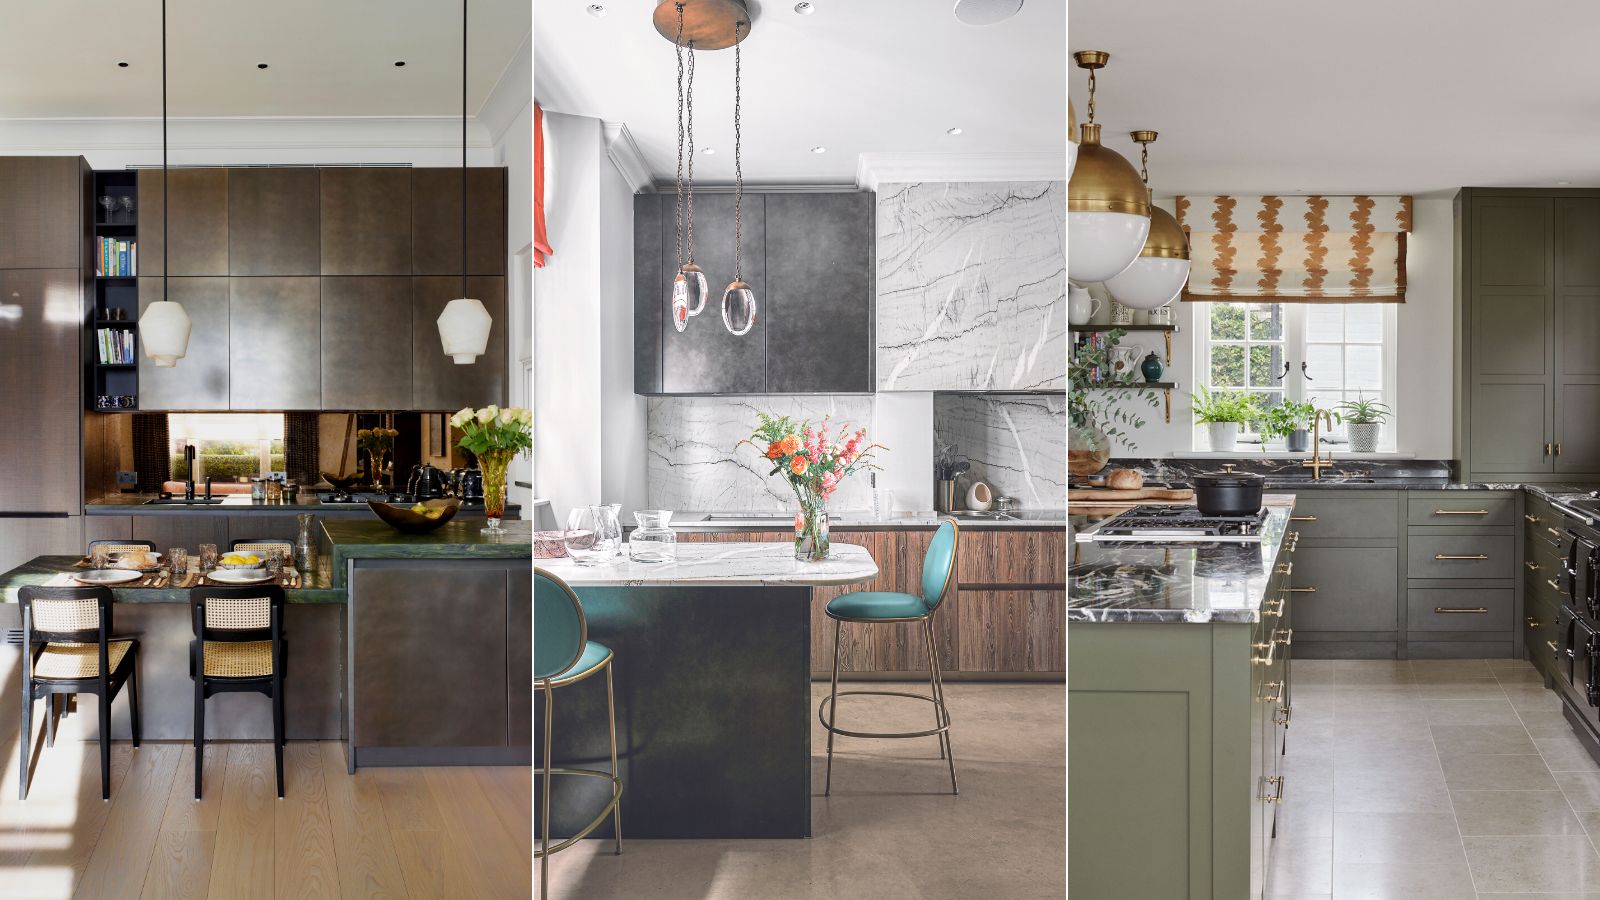 7 Types Of Kitchen Layout: How to Decide